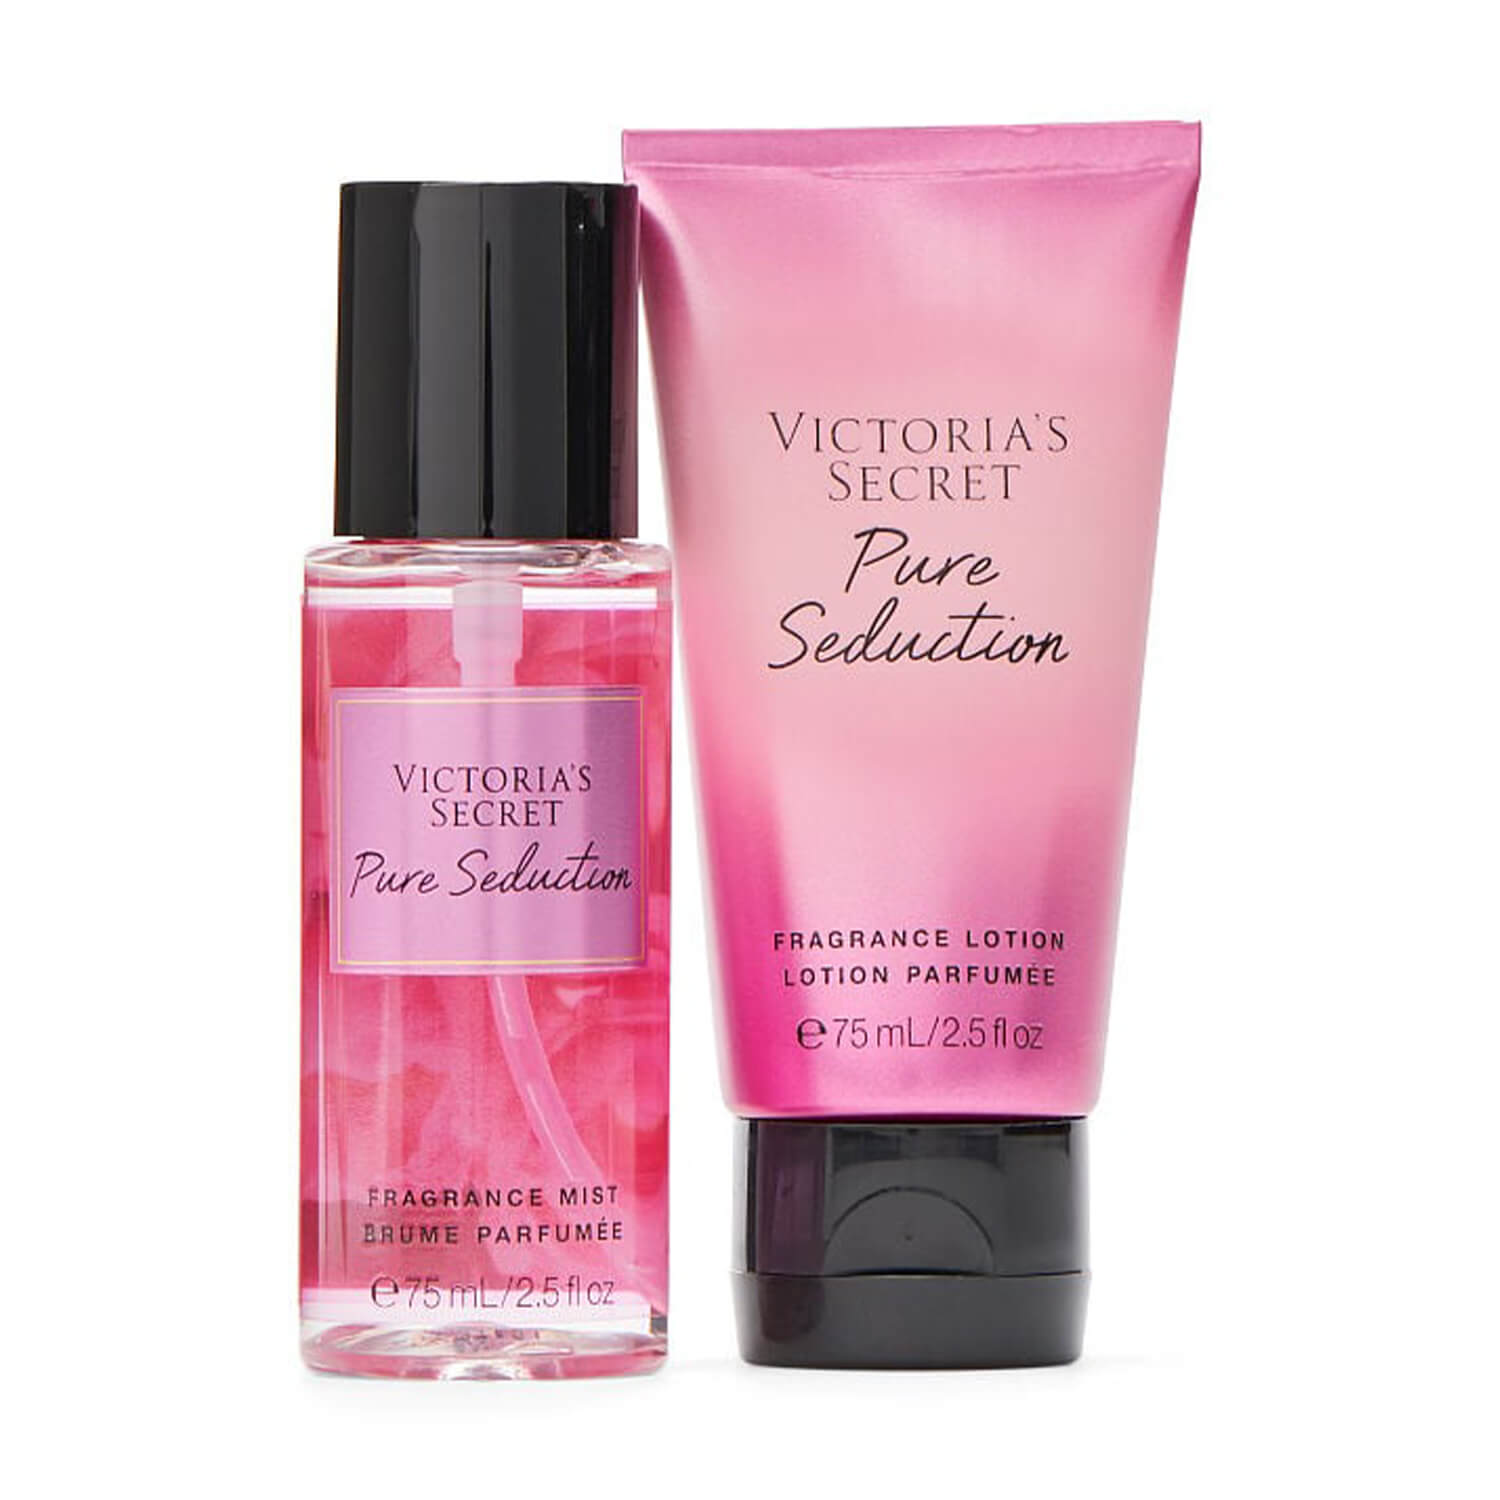 shop Victoria's Secret mist and lotion mini pure seduction set available at Heygirl.pk for delivery in Pakistan